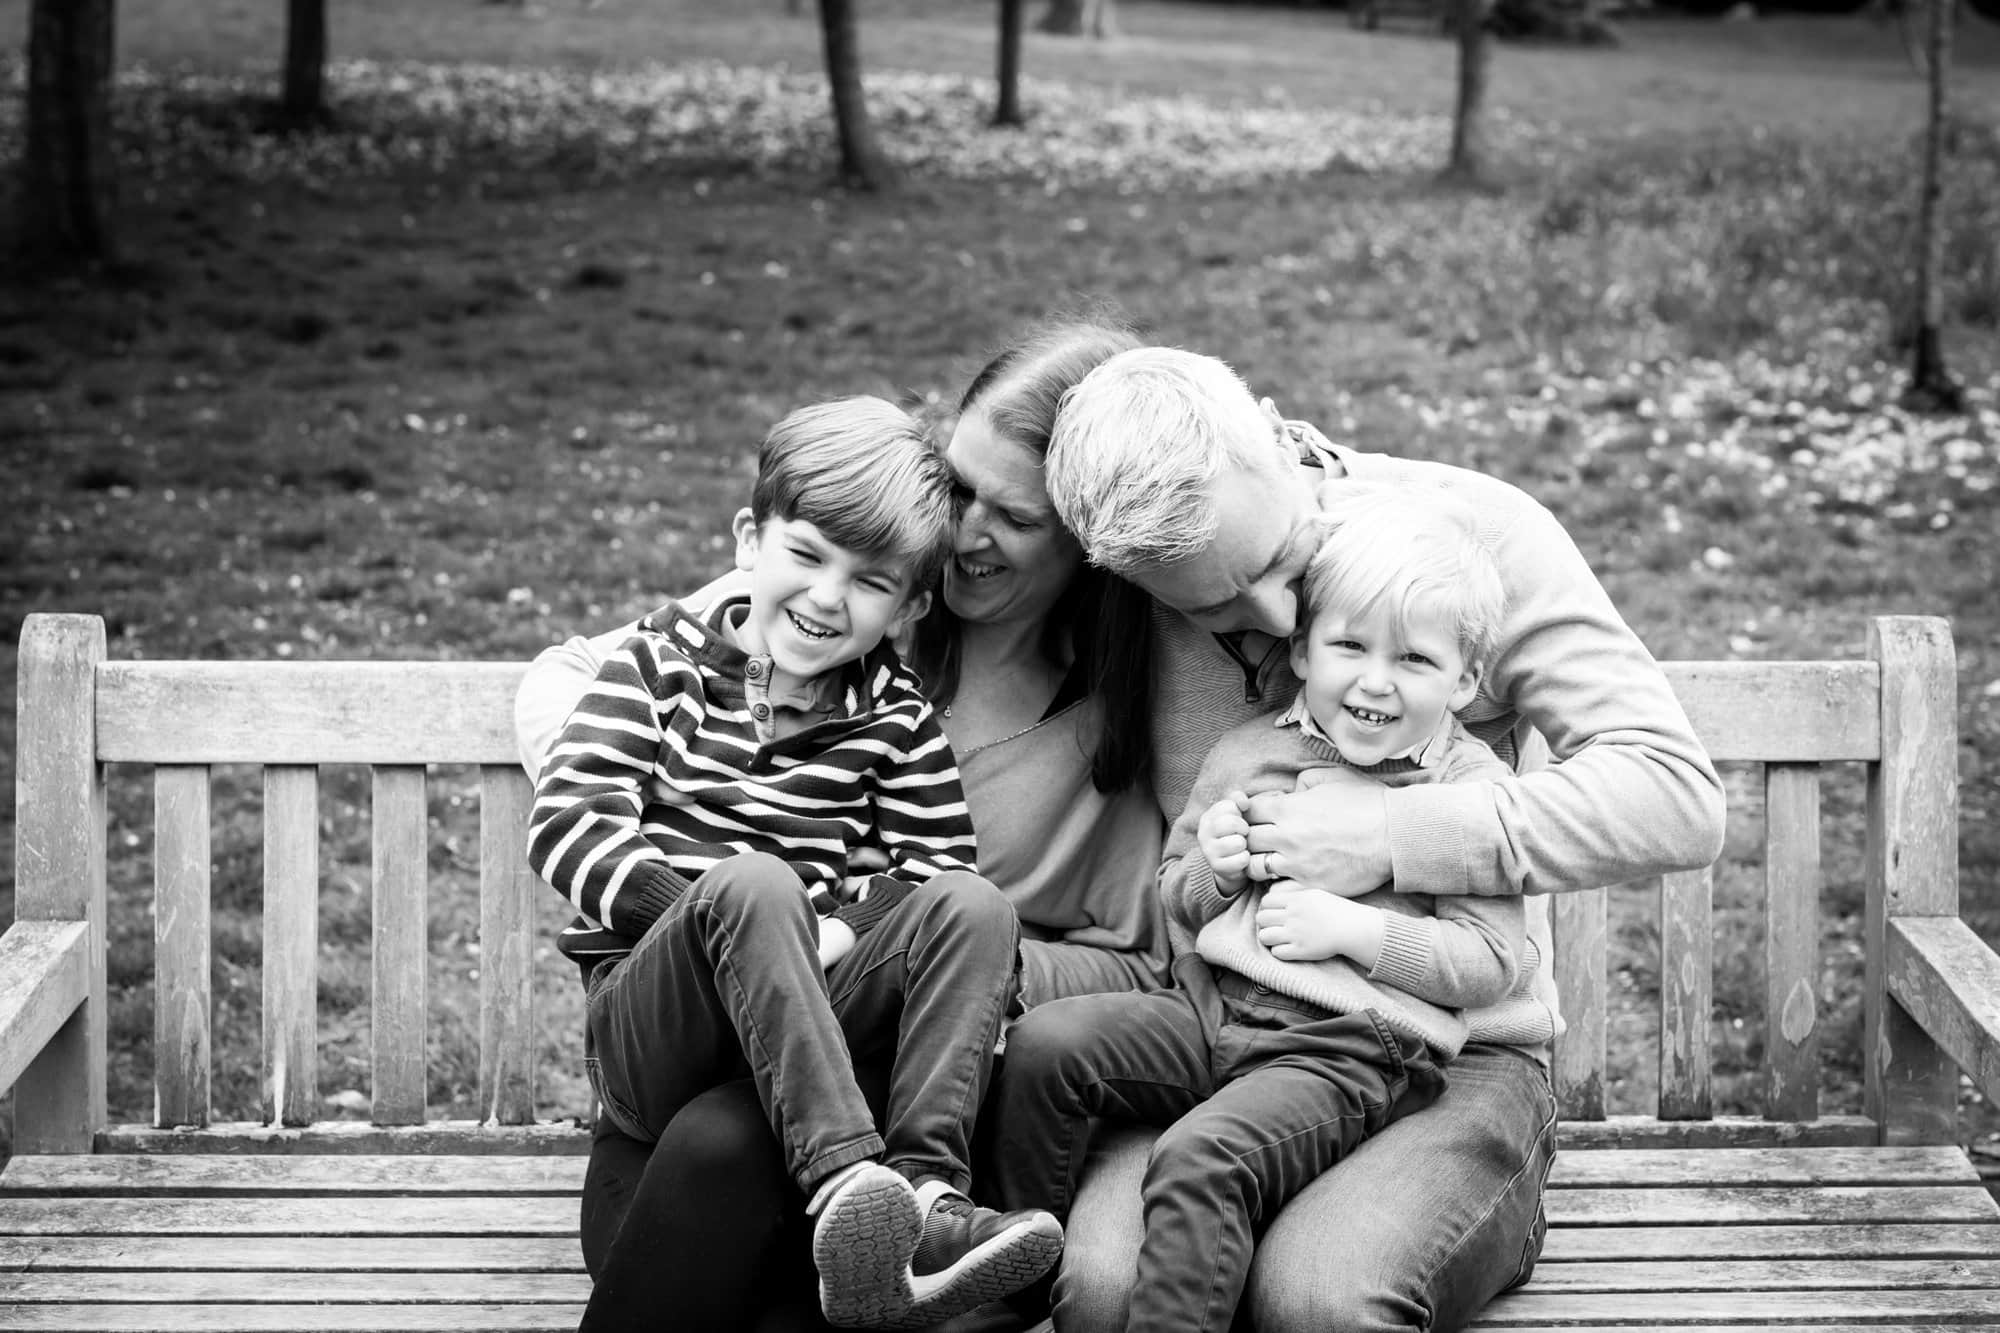 Photoshoot in Bromley of family tickling and children laughing on park bench in black and white image